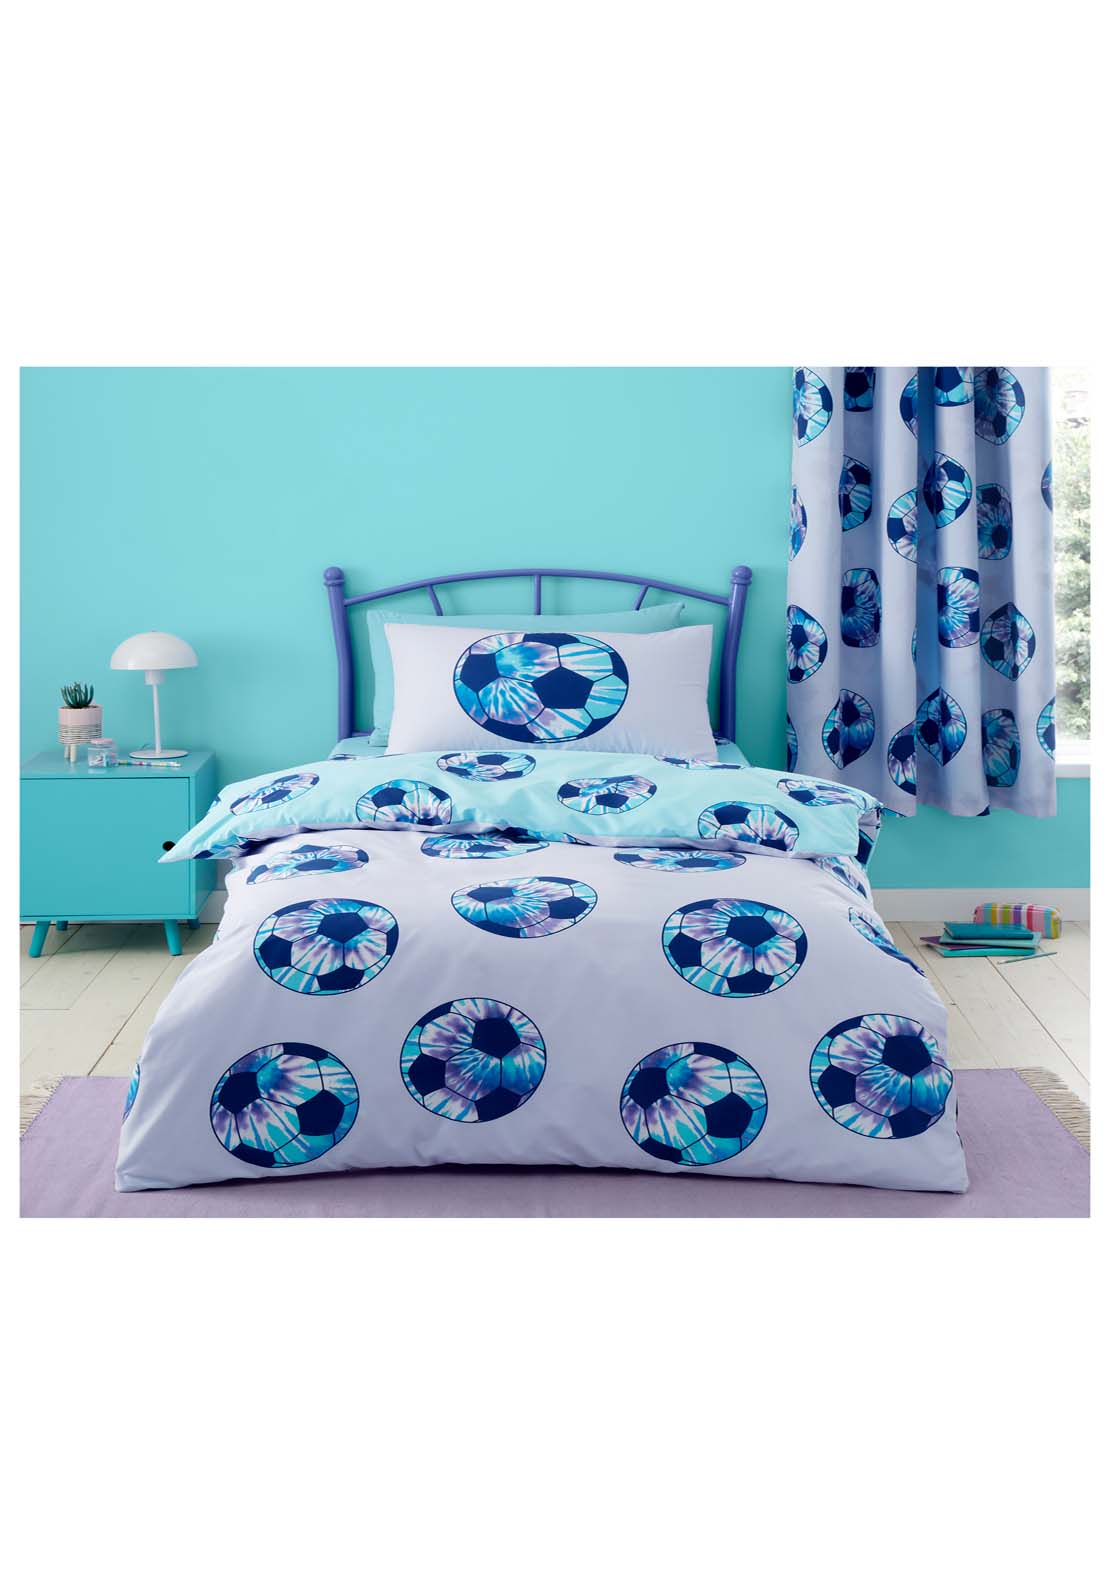  The Home Luxury Collection Tie Dye Football Duvet Cover Set 2 Shaws Department Stores